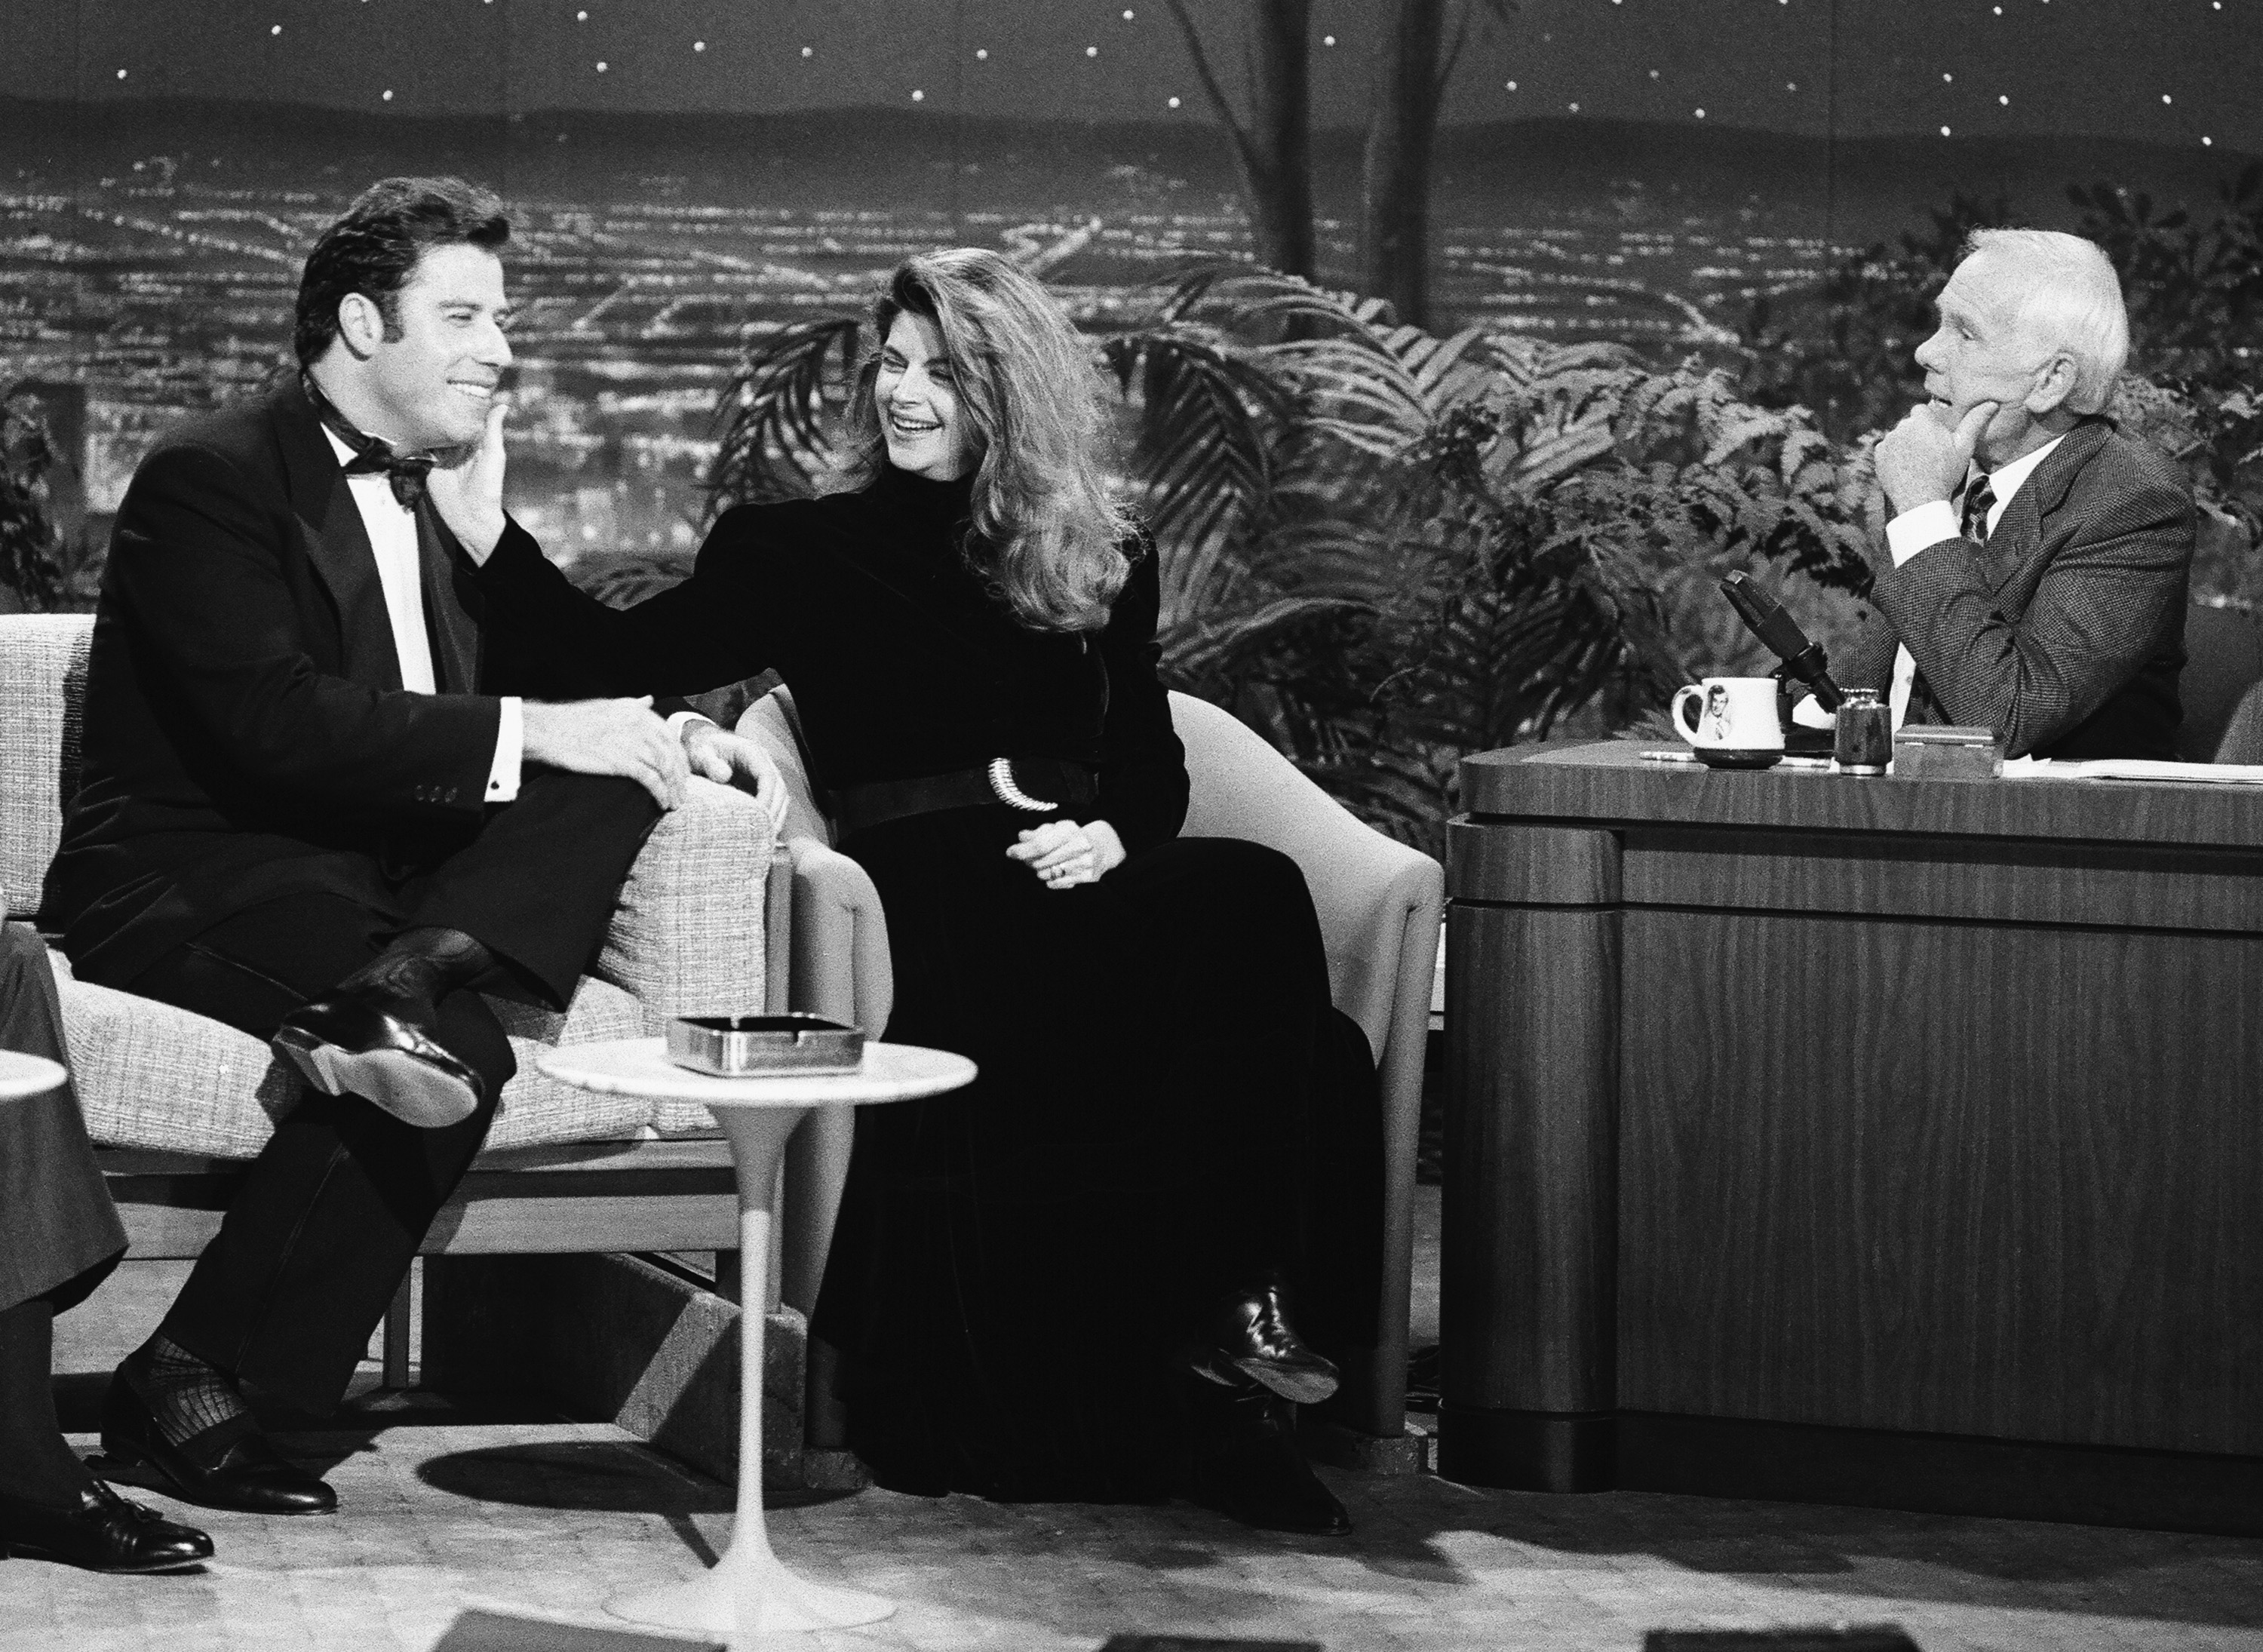 John Travolta and Kirstie Alley during an interview with host Johnny Carson on December 13, 1990